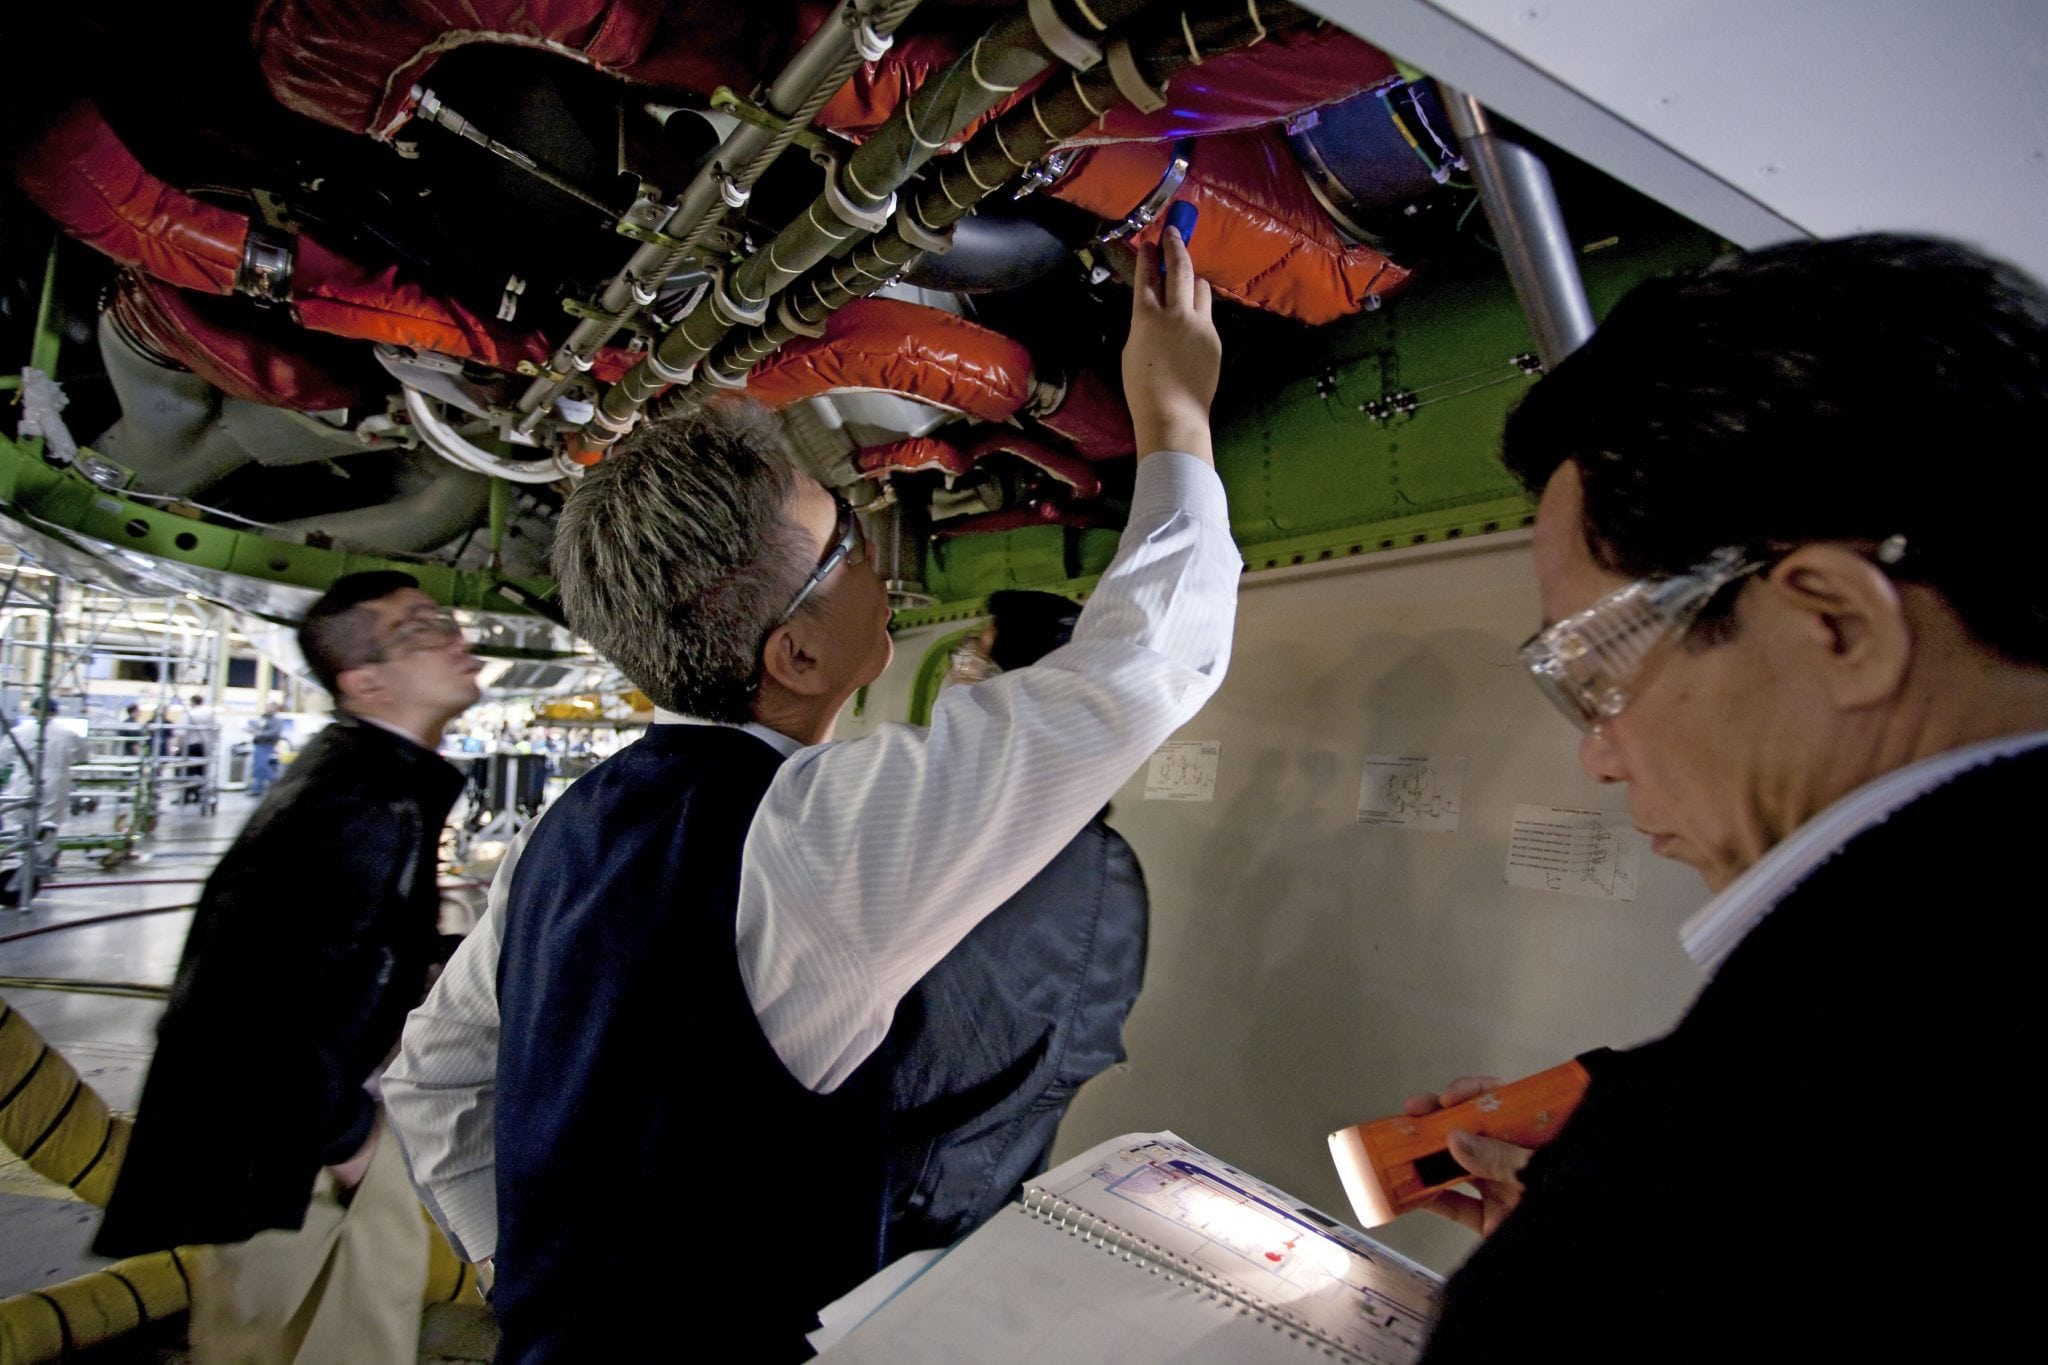 Asia Pacific leads projected demand for pilots and technicians